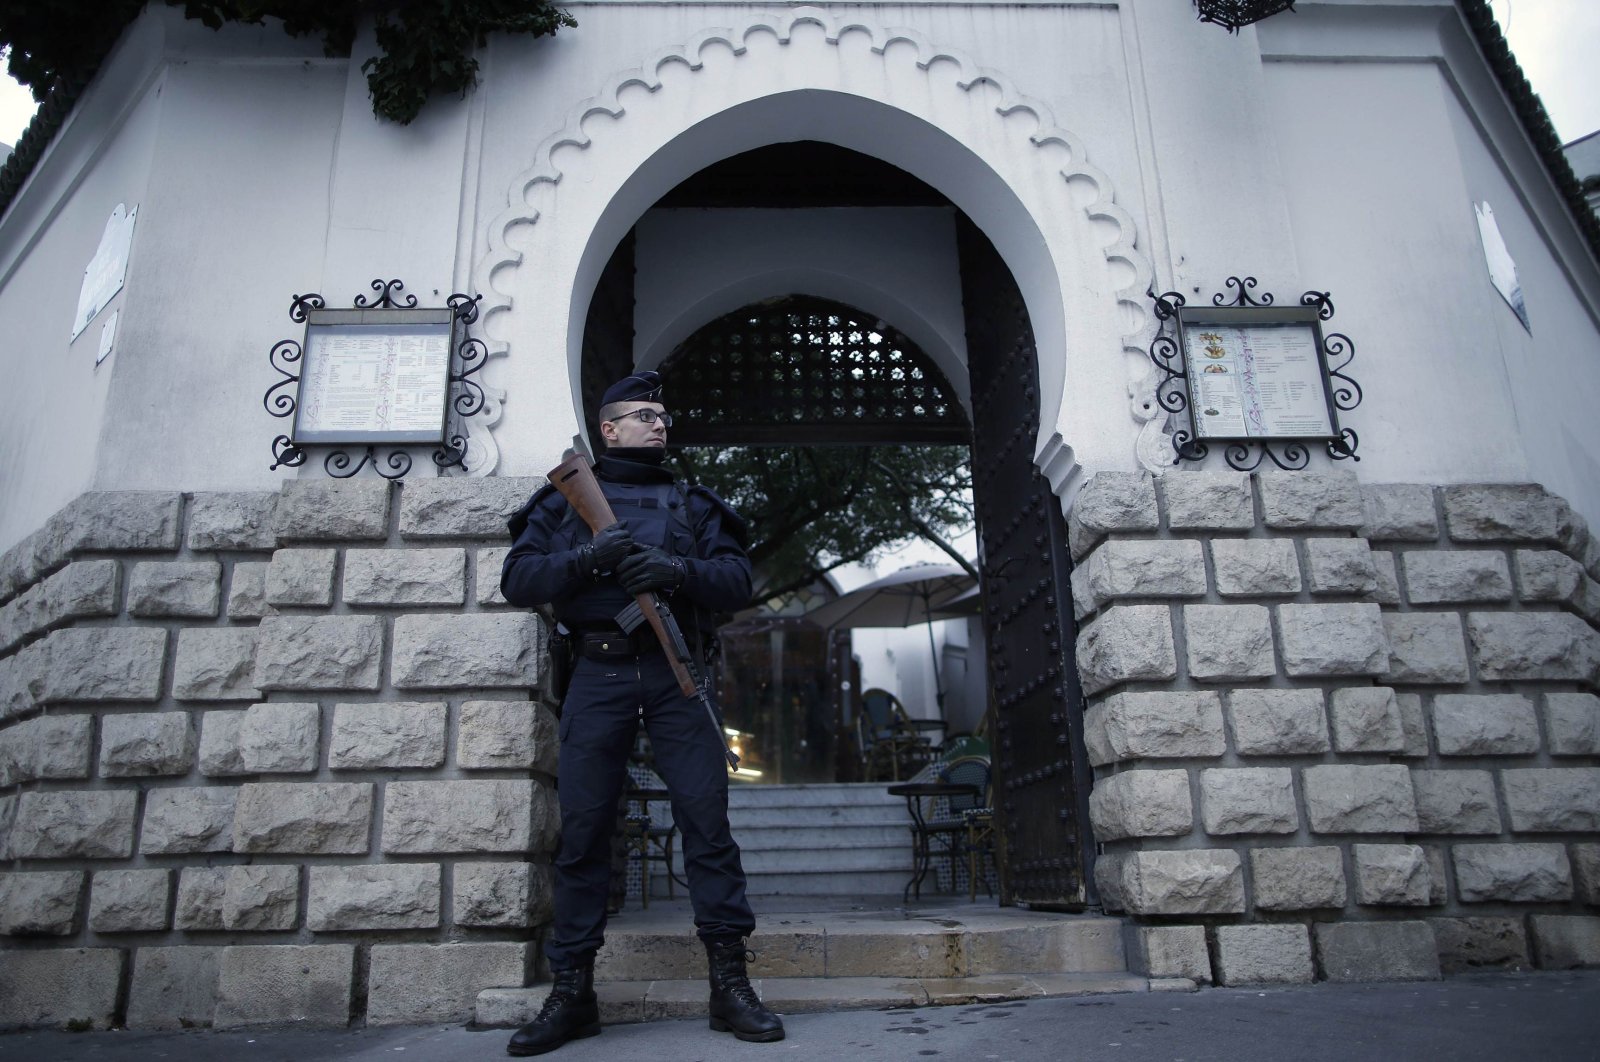 A French police officer stands guard in front of the entrance of the Paris Grand Mosque, Paris, France, Jan. 14, 2015. (Reuters Photo)